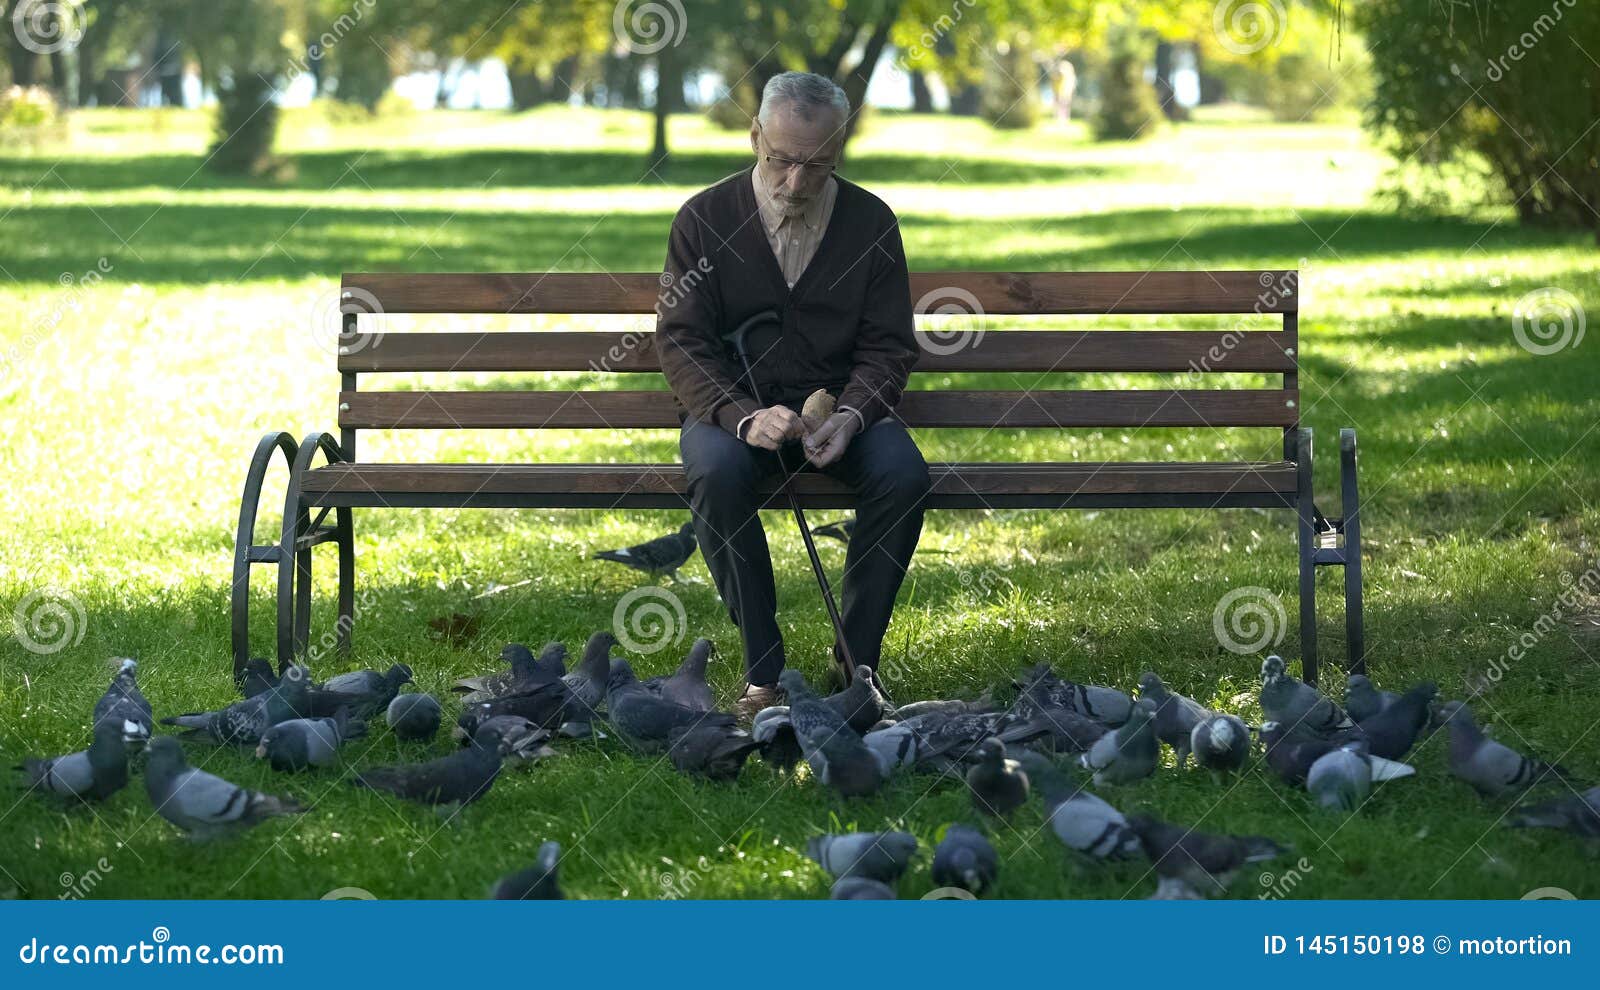 calm old man sitting on bench in park and feeding pigeons, loneliness in old age